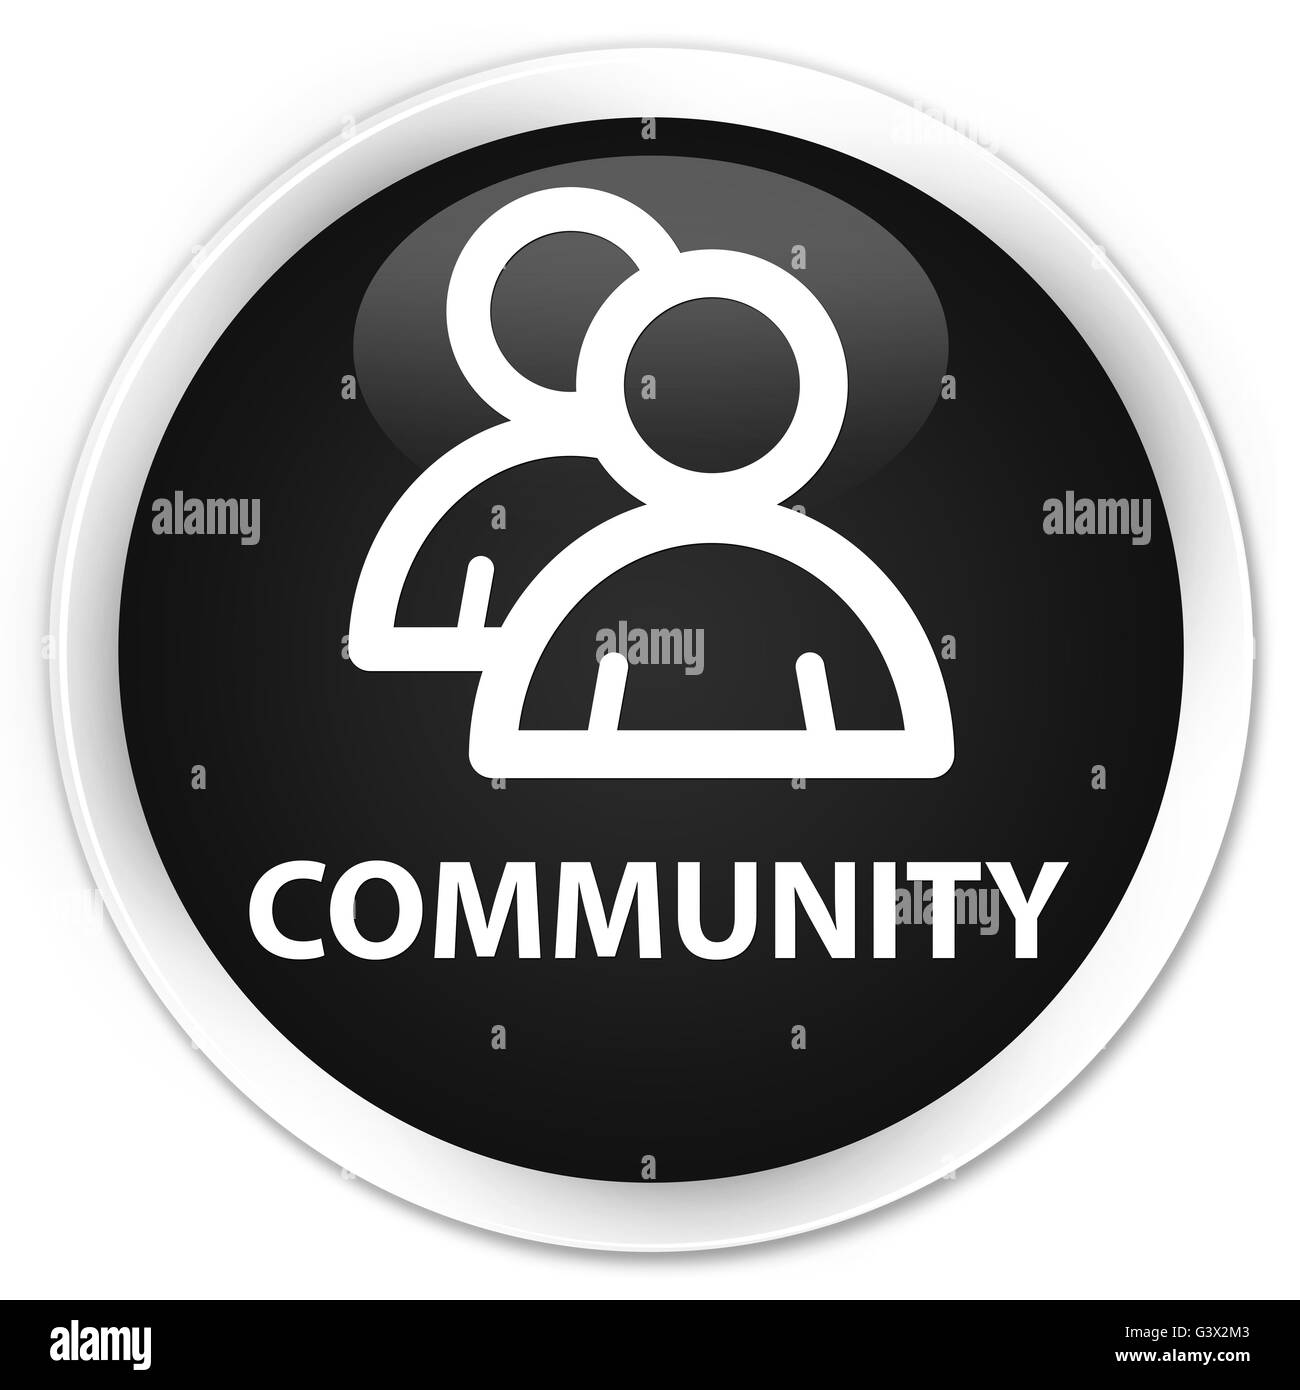 Community (group icon) isolated on premium black round button abstract illustration Stock Photo